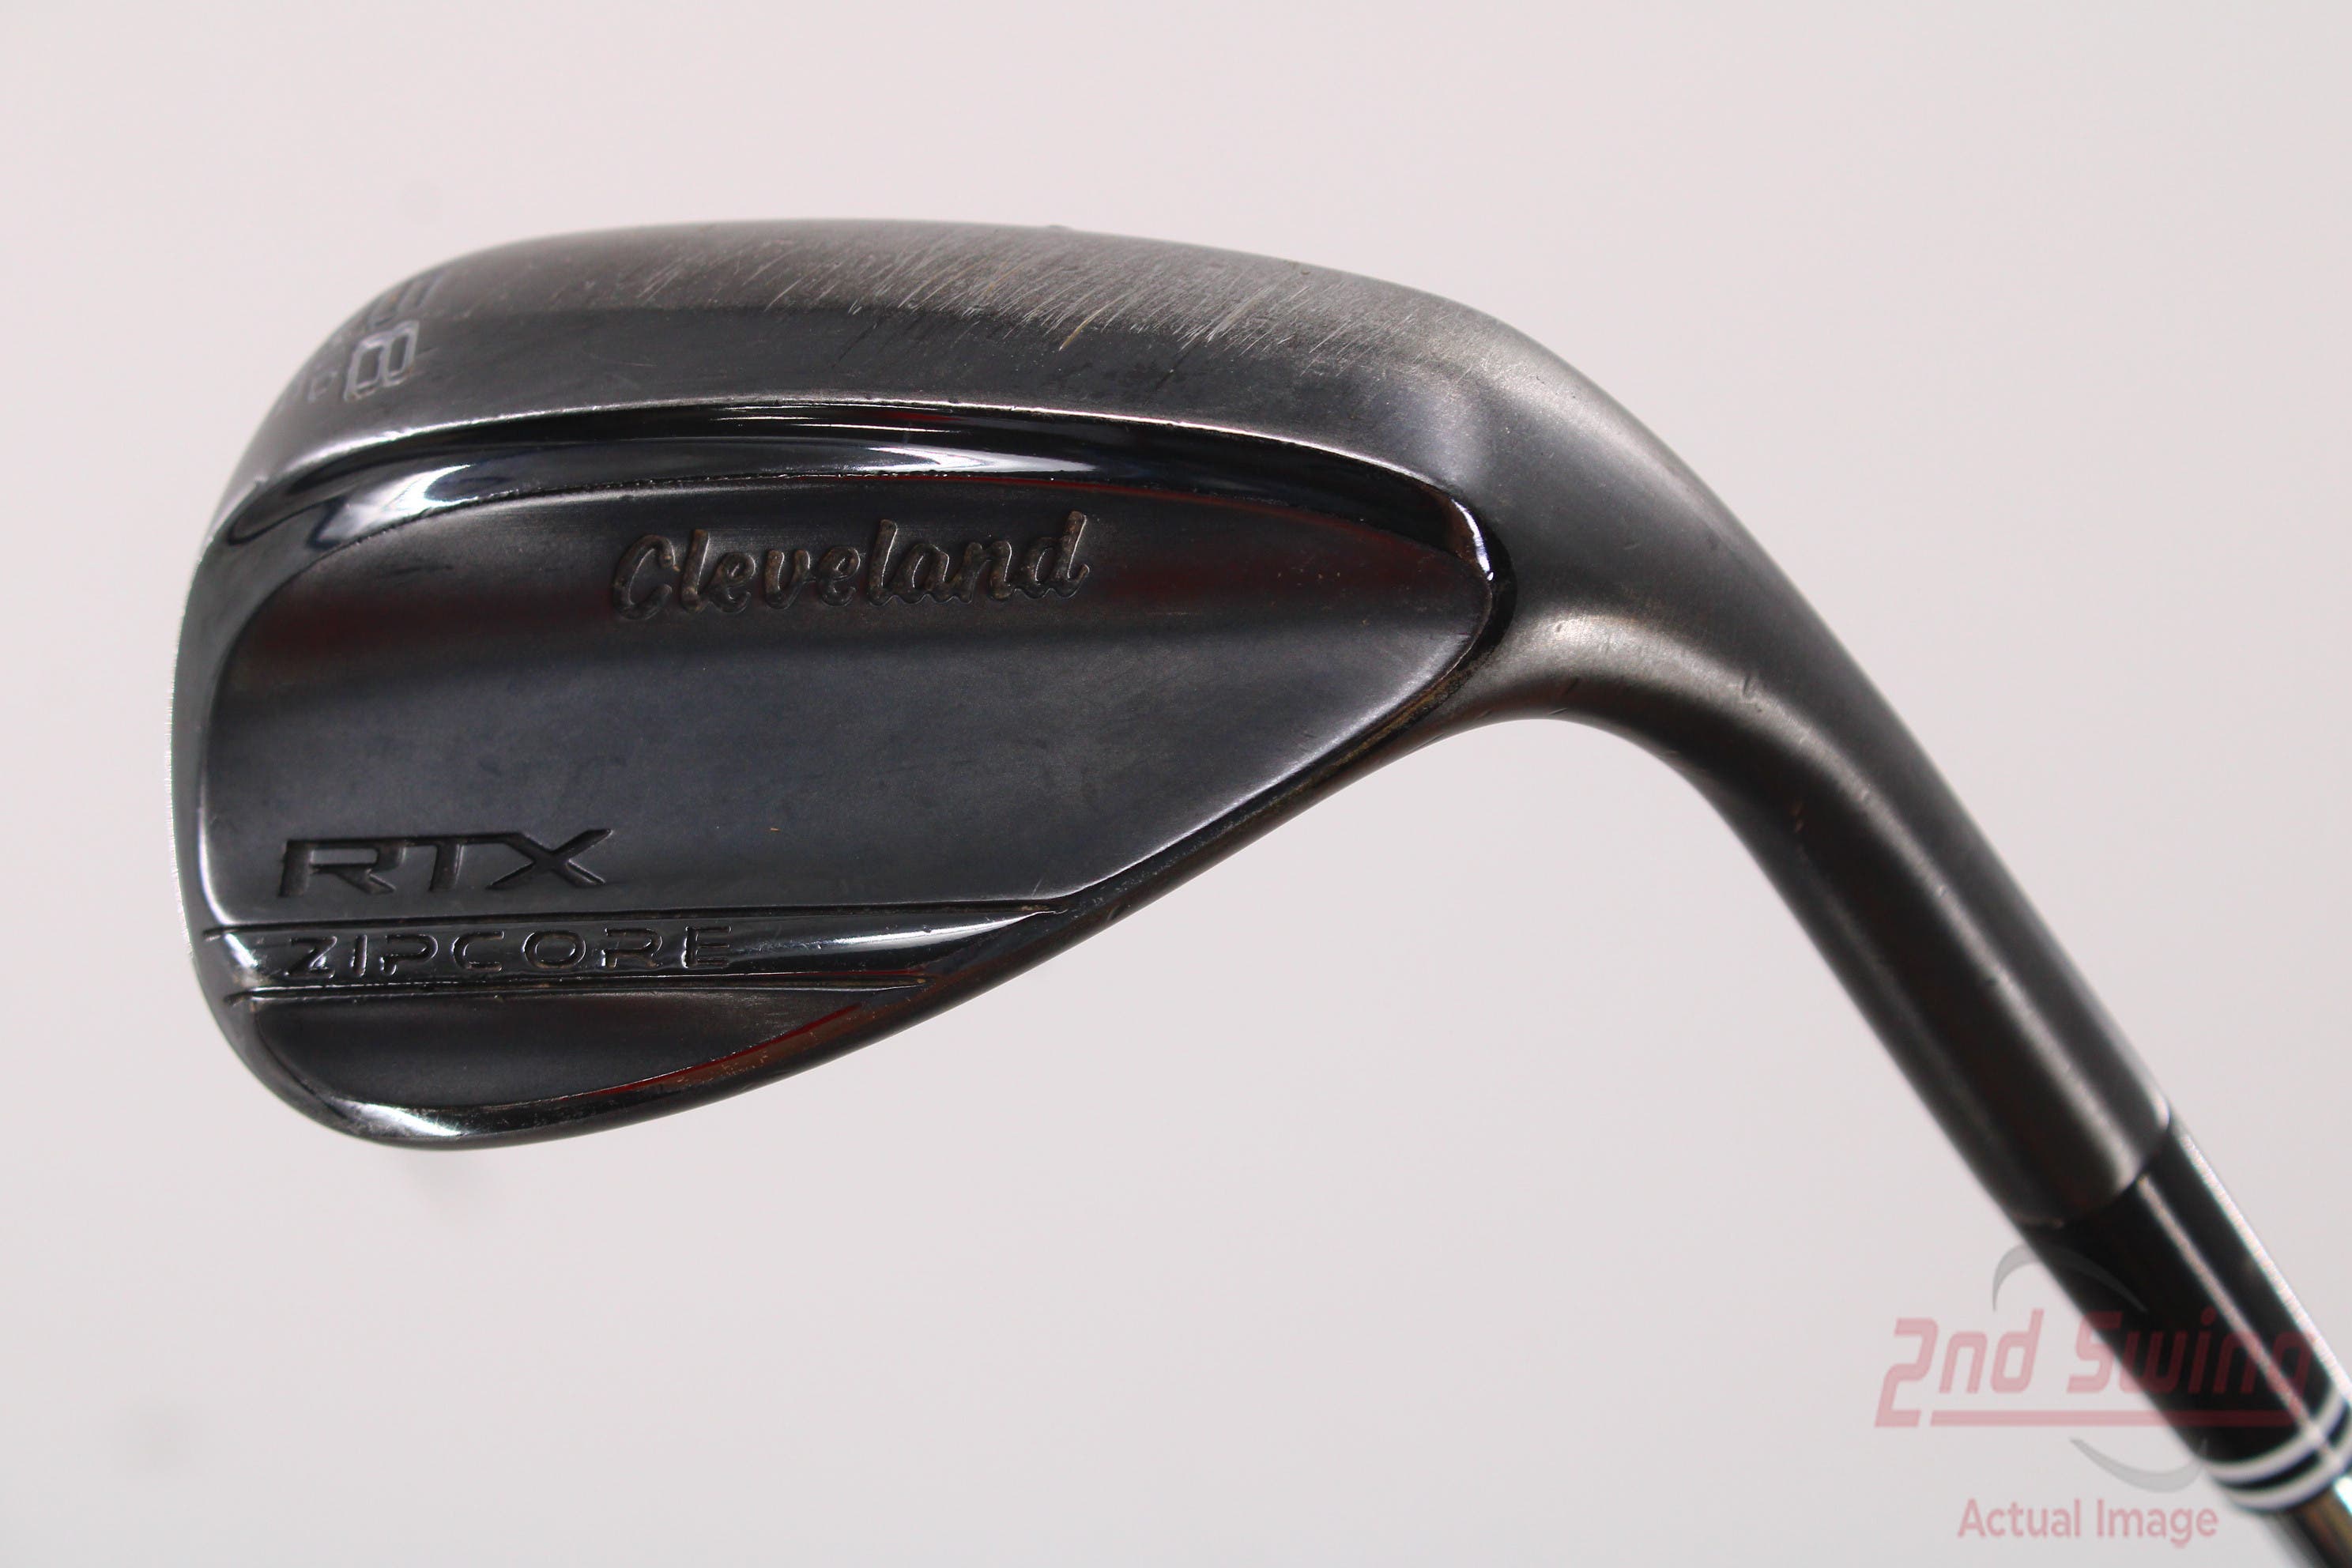 Cleveland RTX ZipCore Black Satin Wedge (A-T2334207334)